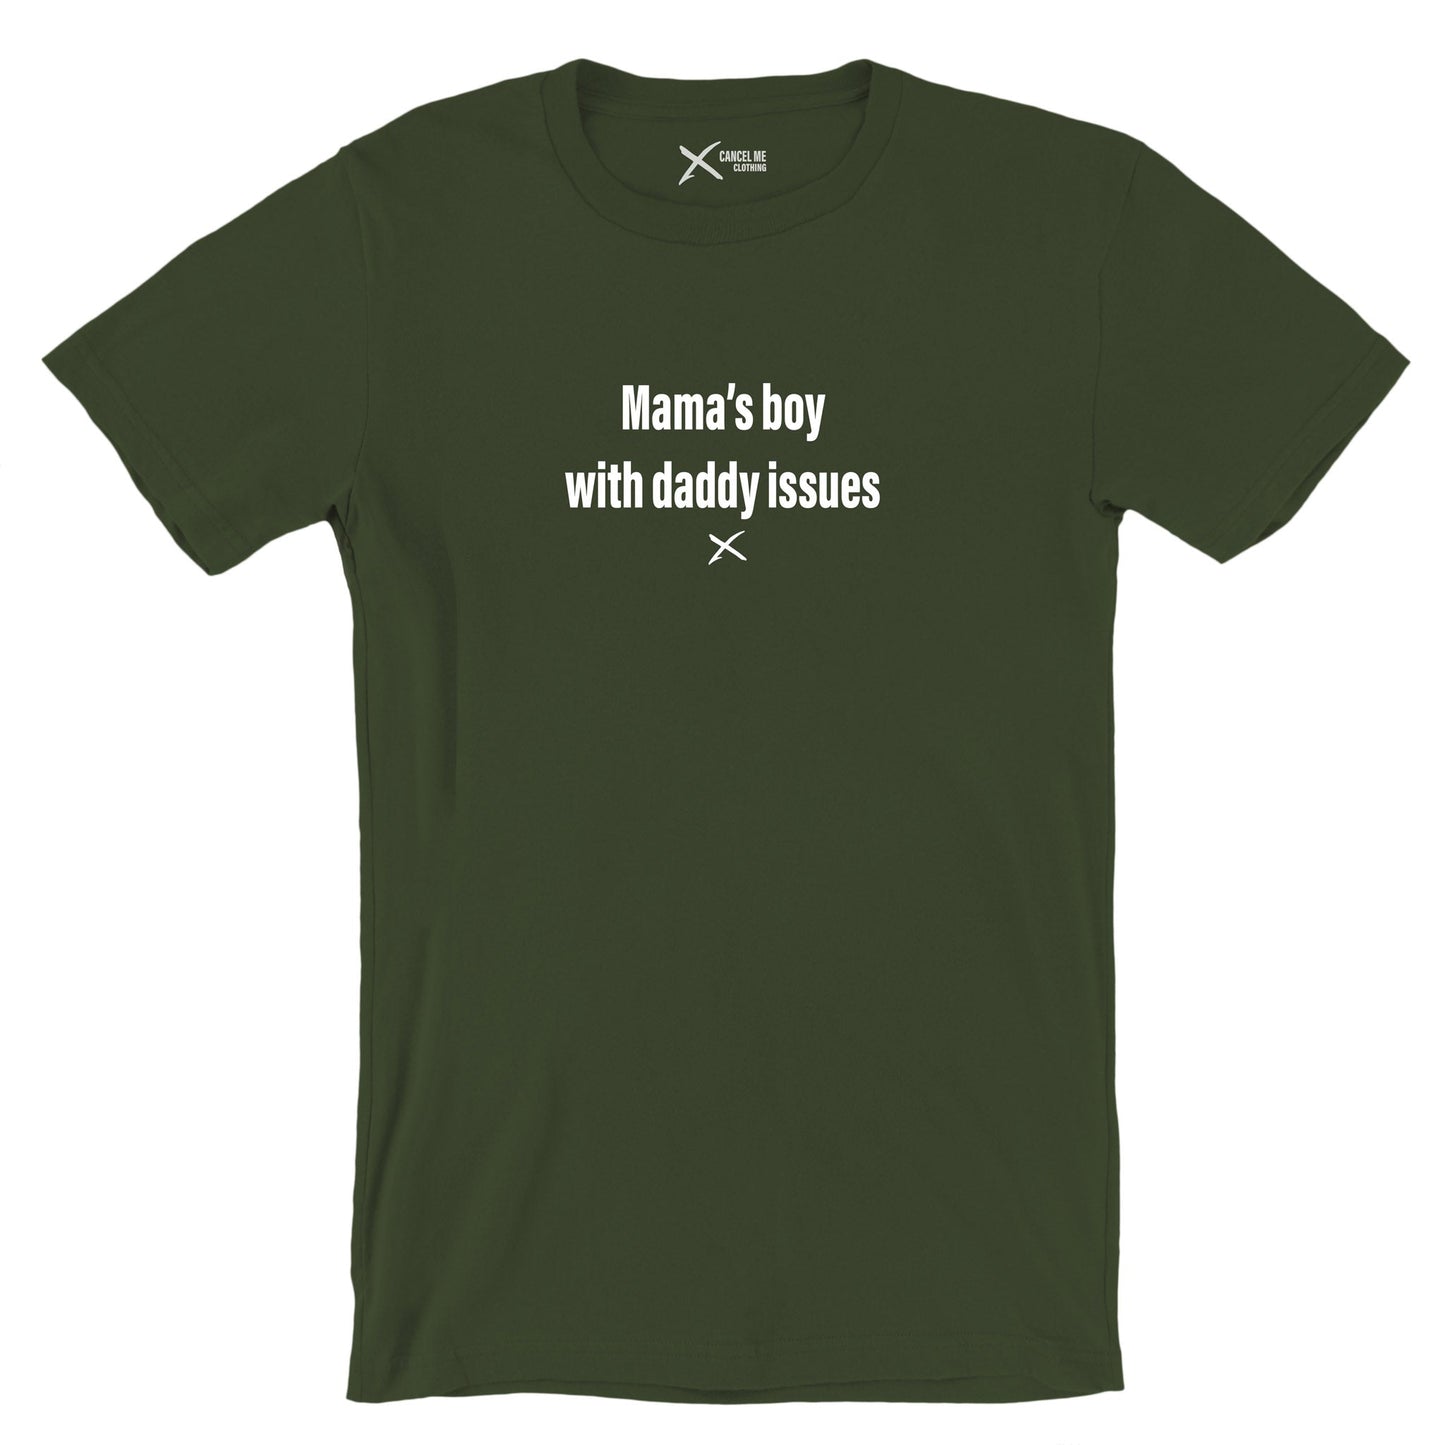 Mama's boy with daddy issues - Shirt